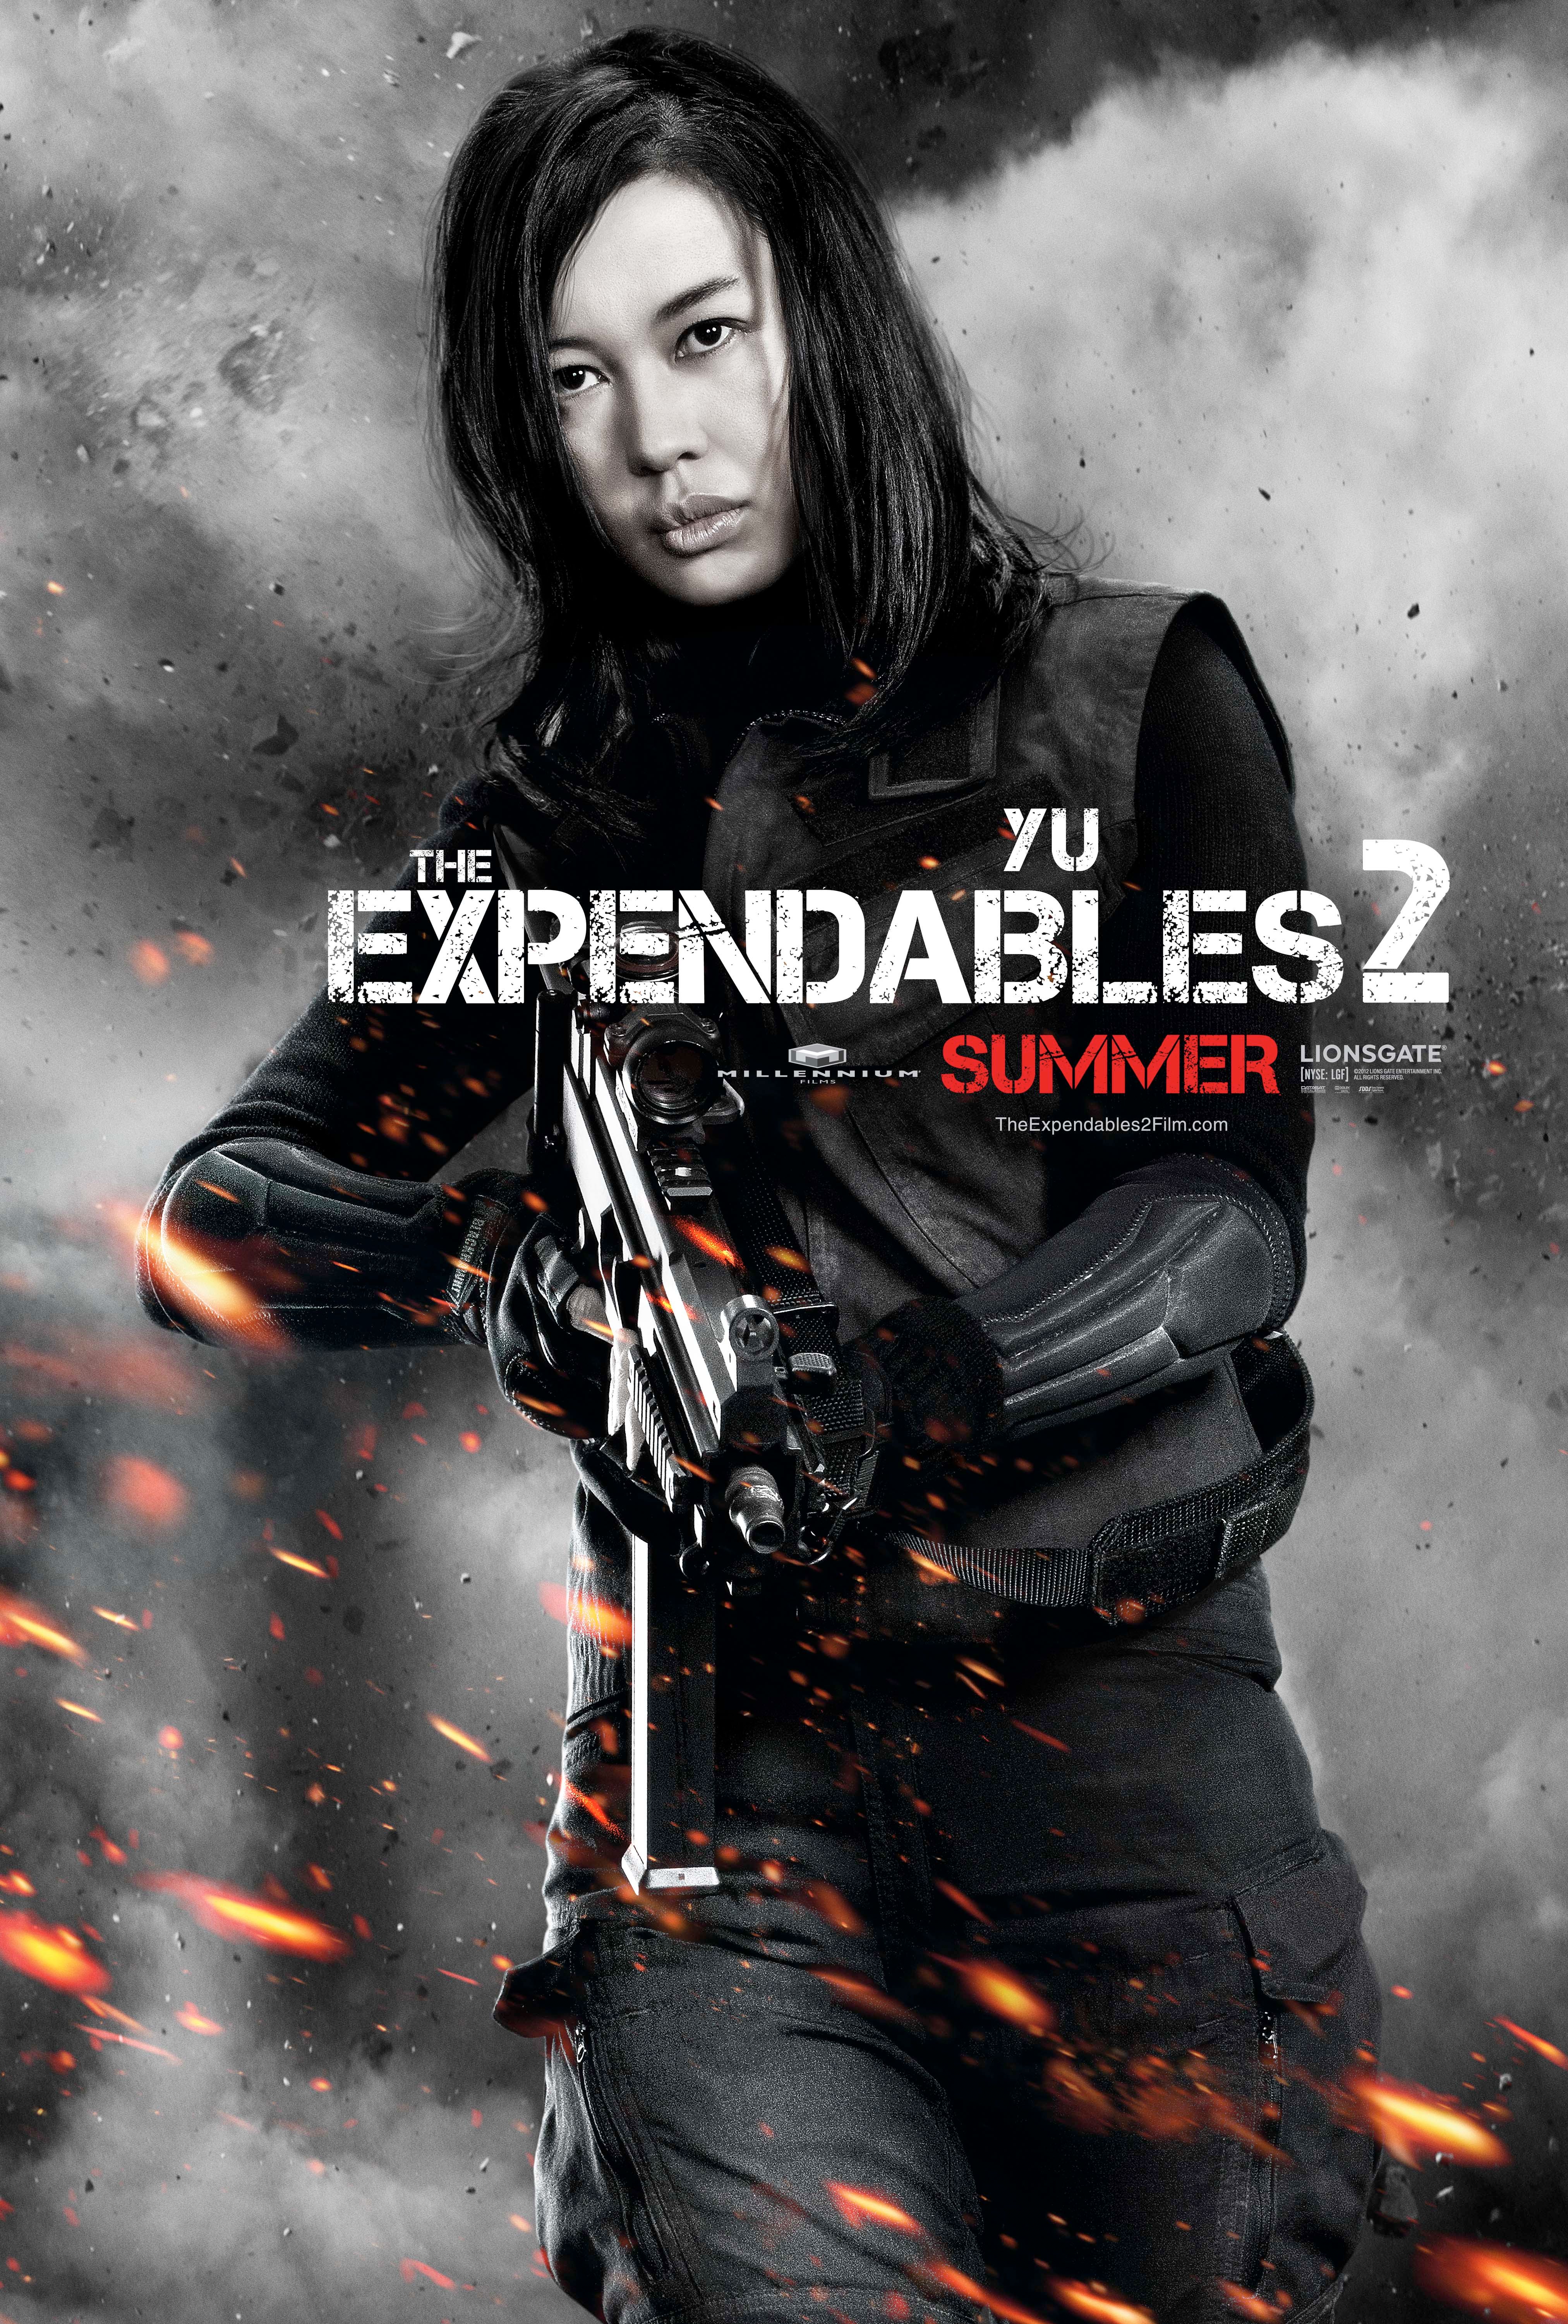 The Expendables 2 Character Poser #9